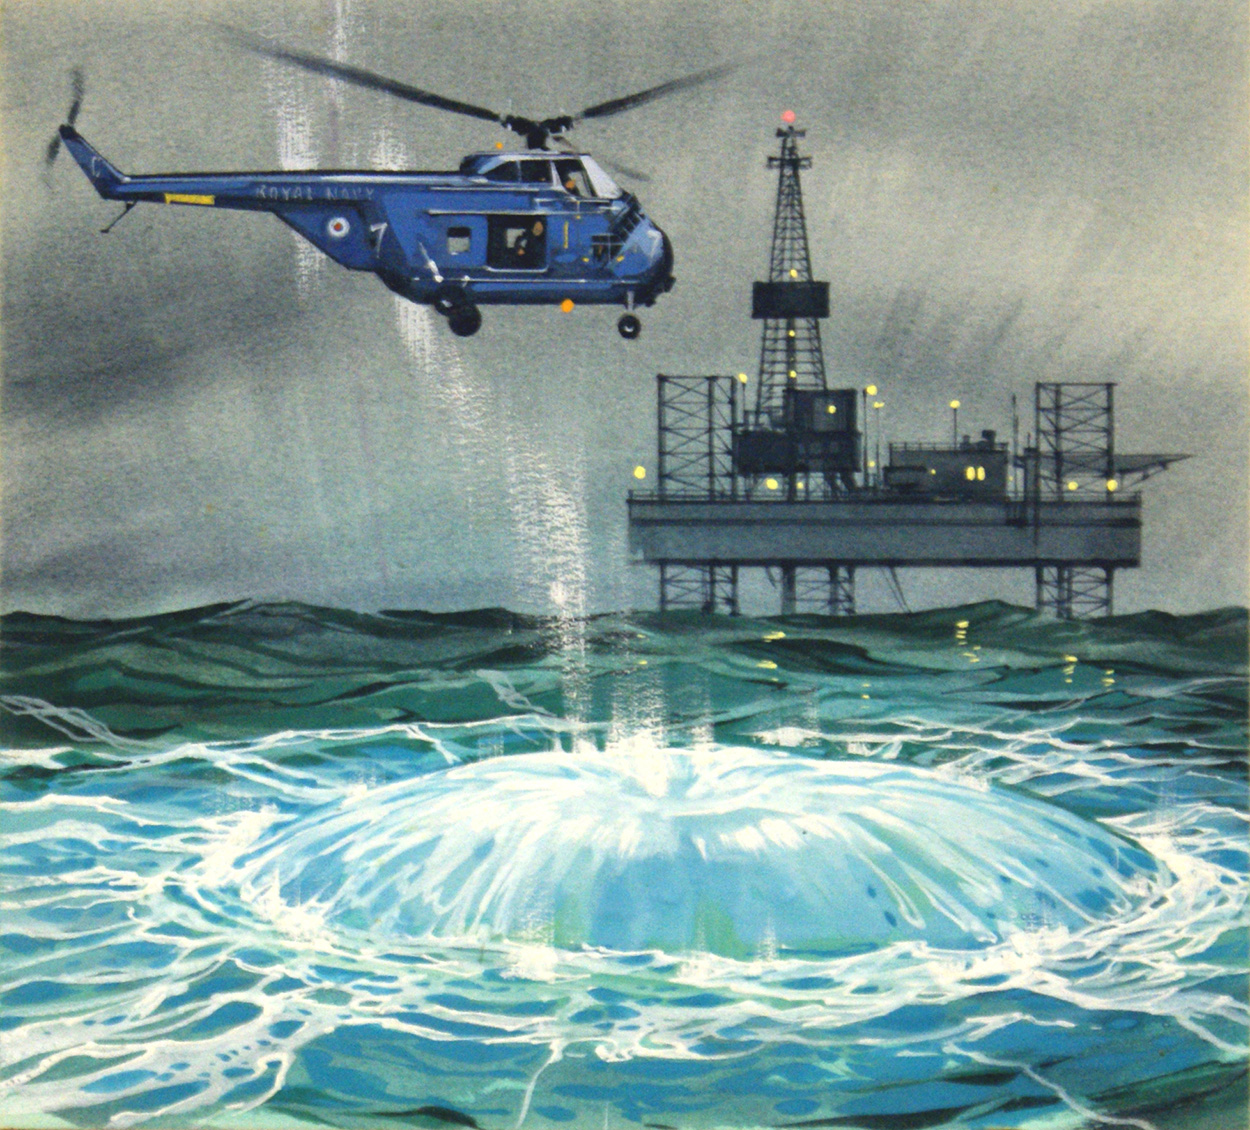 Helicopter & Oil Rig (Original) art by Air (Wilf Hardy) at The Illustration Art Gallery